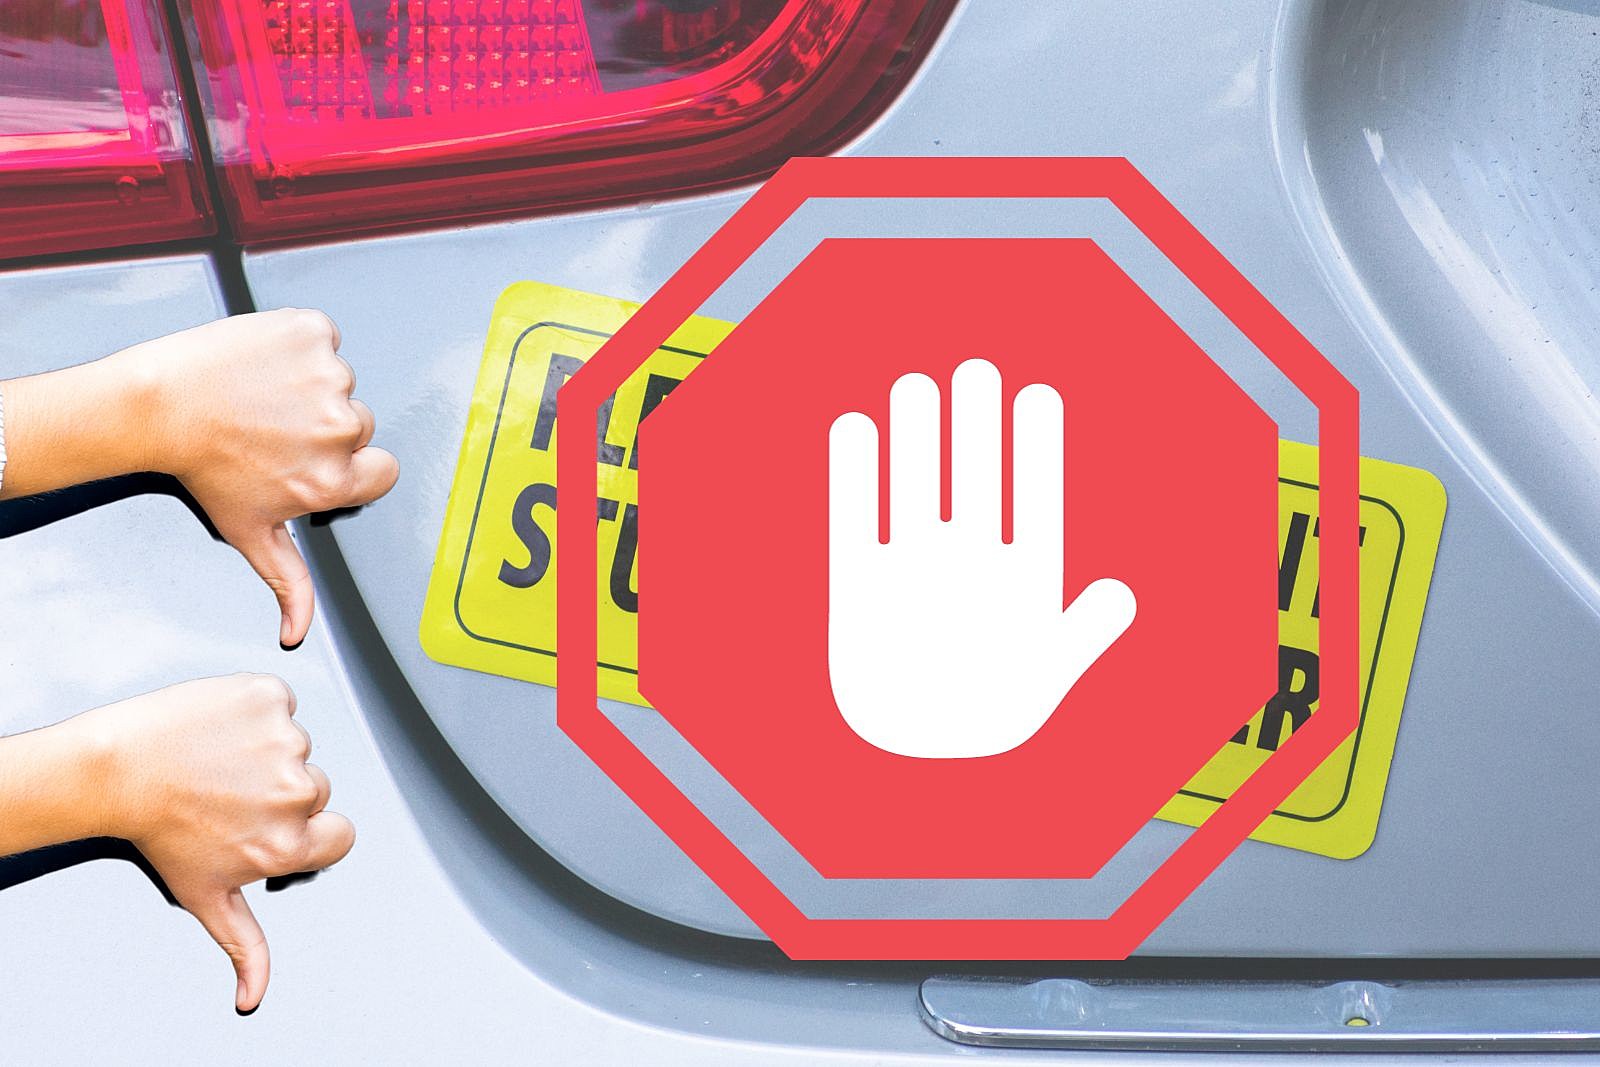 Your bumper stickers could make you a target for criminals